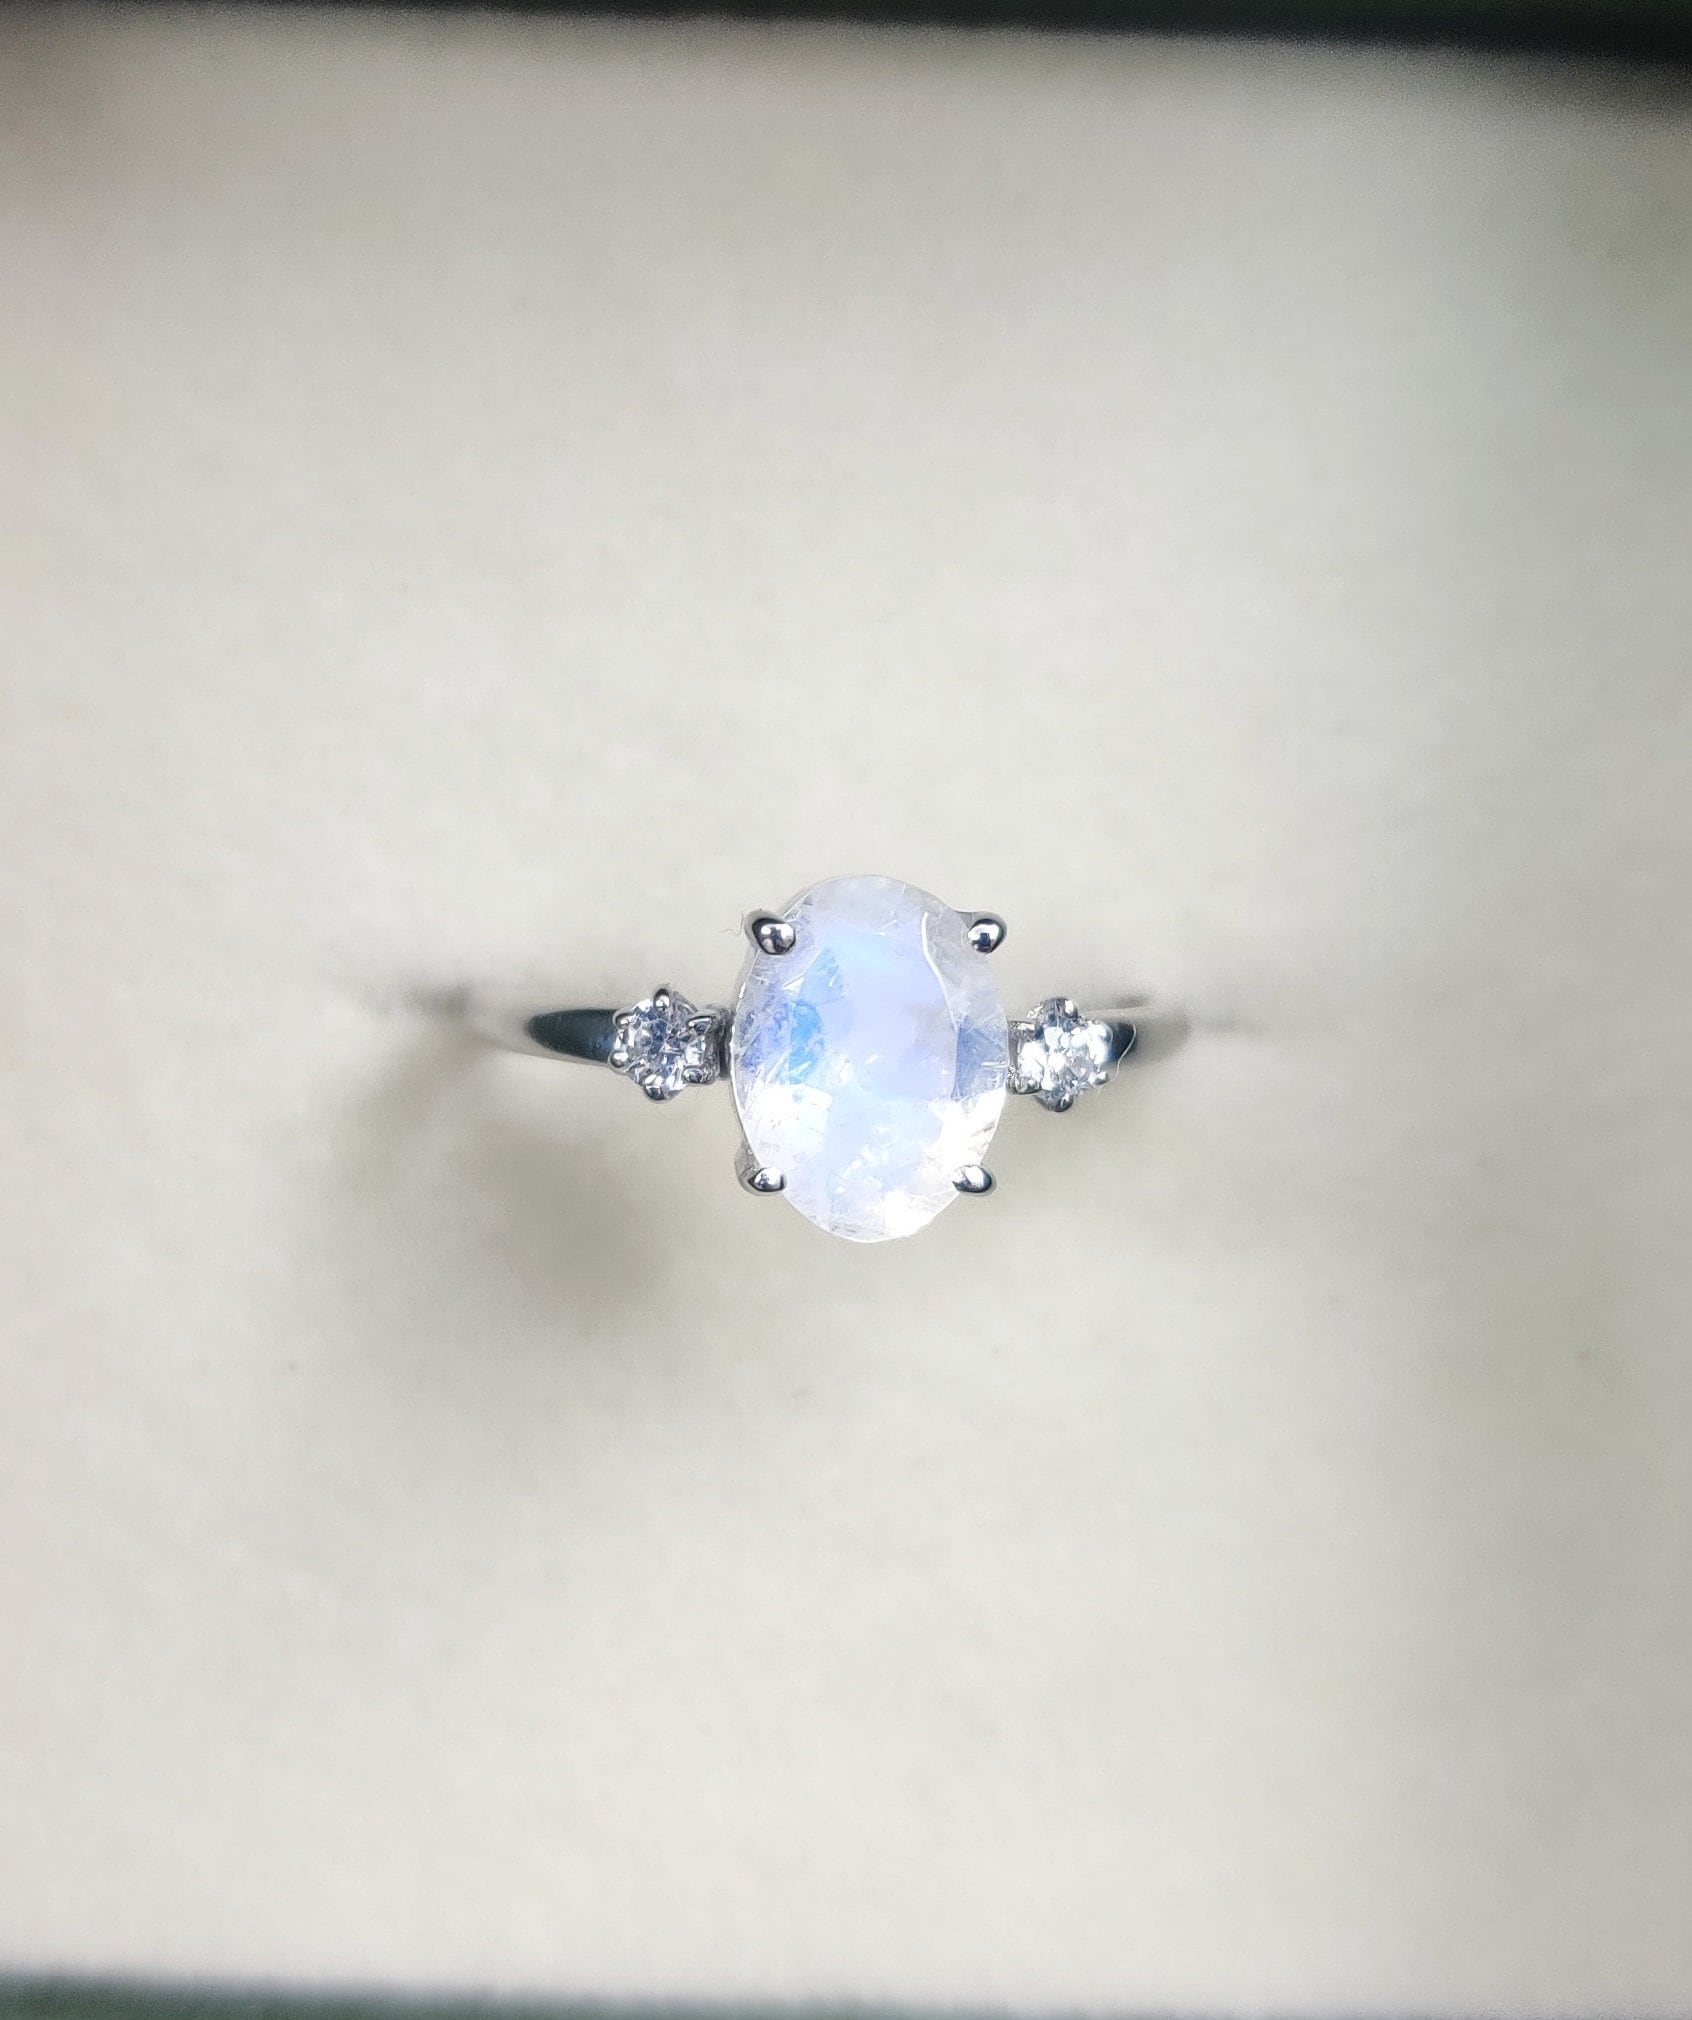 Sparkling Pear Blue Moonstone Ring Women Jewelry Gift 14K Rose Gold Plated